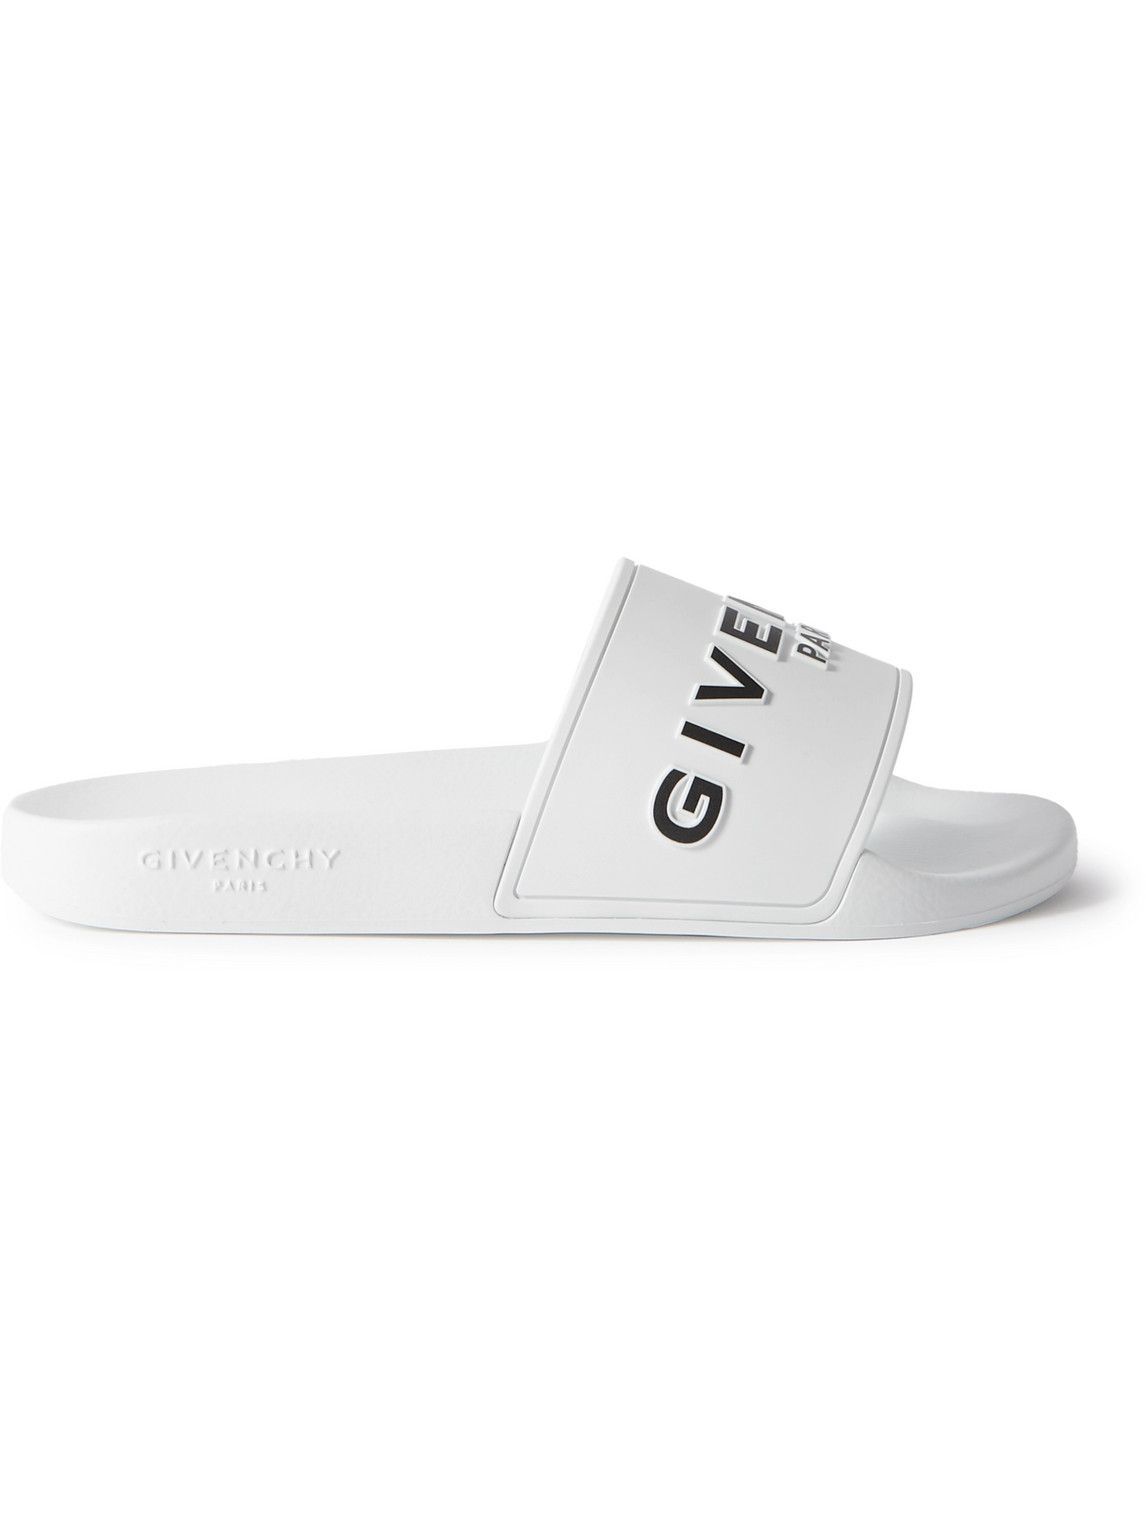 Givenchy - Logo-Embossed Rubber Slides - White Givenchy